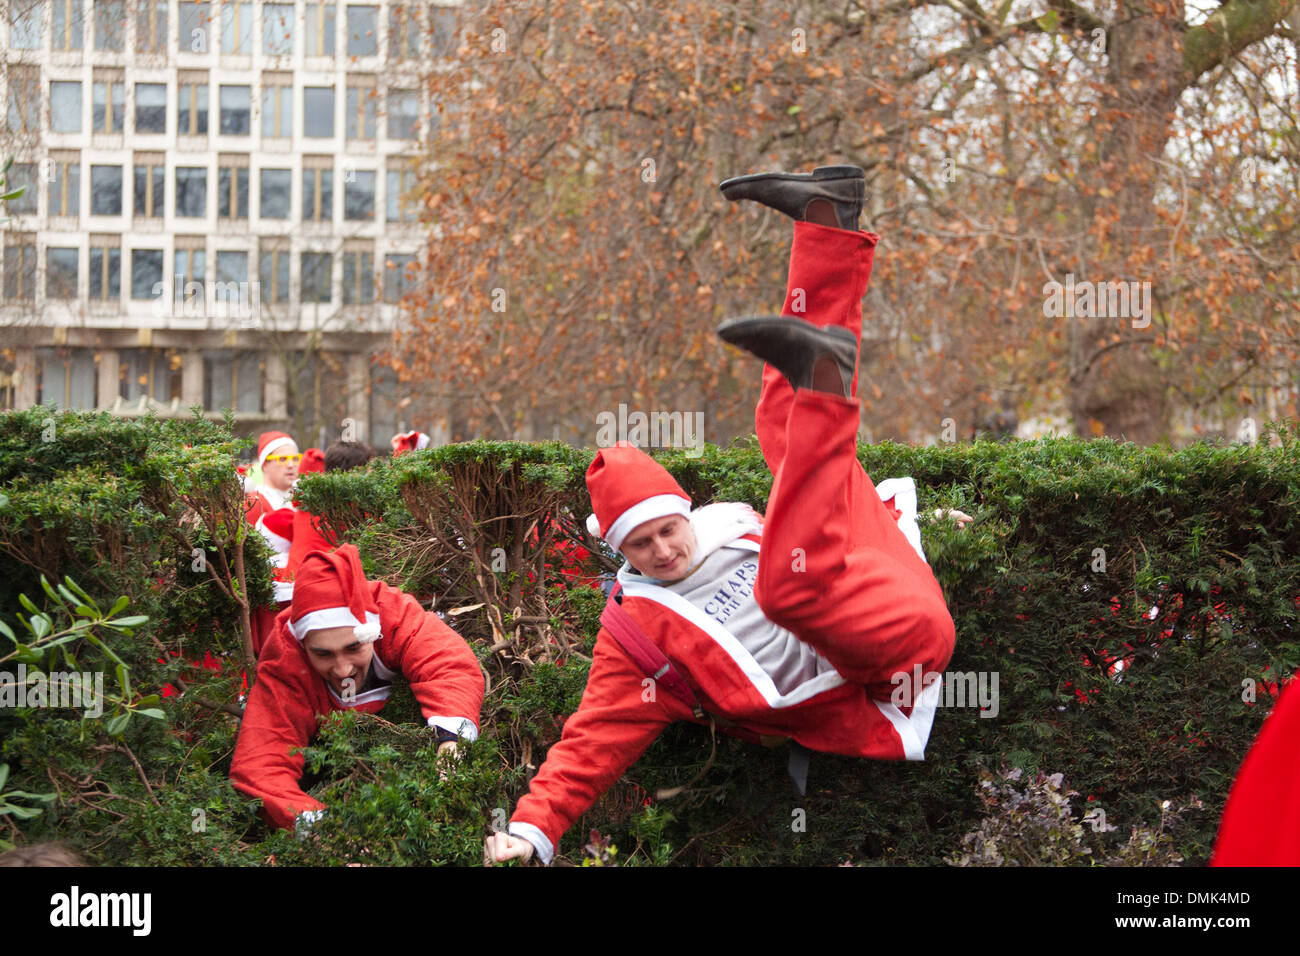 London, UK. 14th of December 2013 Participants of SantaCon attempt to jump over a hedge in Grosvenor Square Gardens outside the US embassy. Credit:  nelson pereira/Alamy Live News Stock Photo